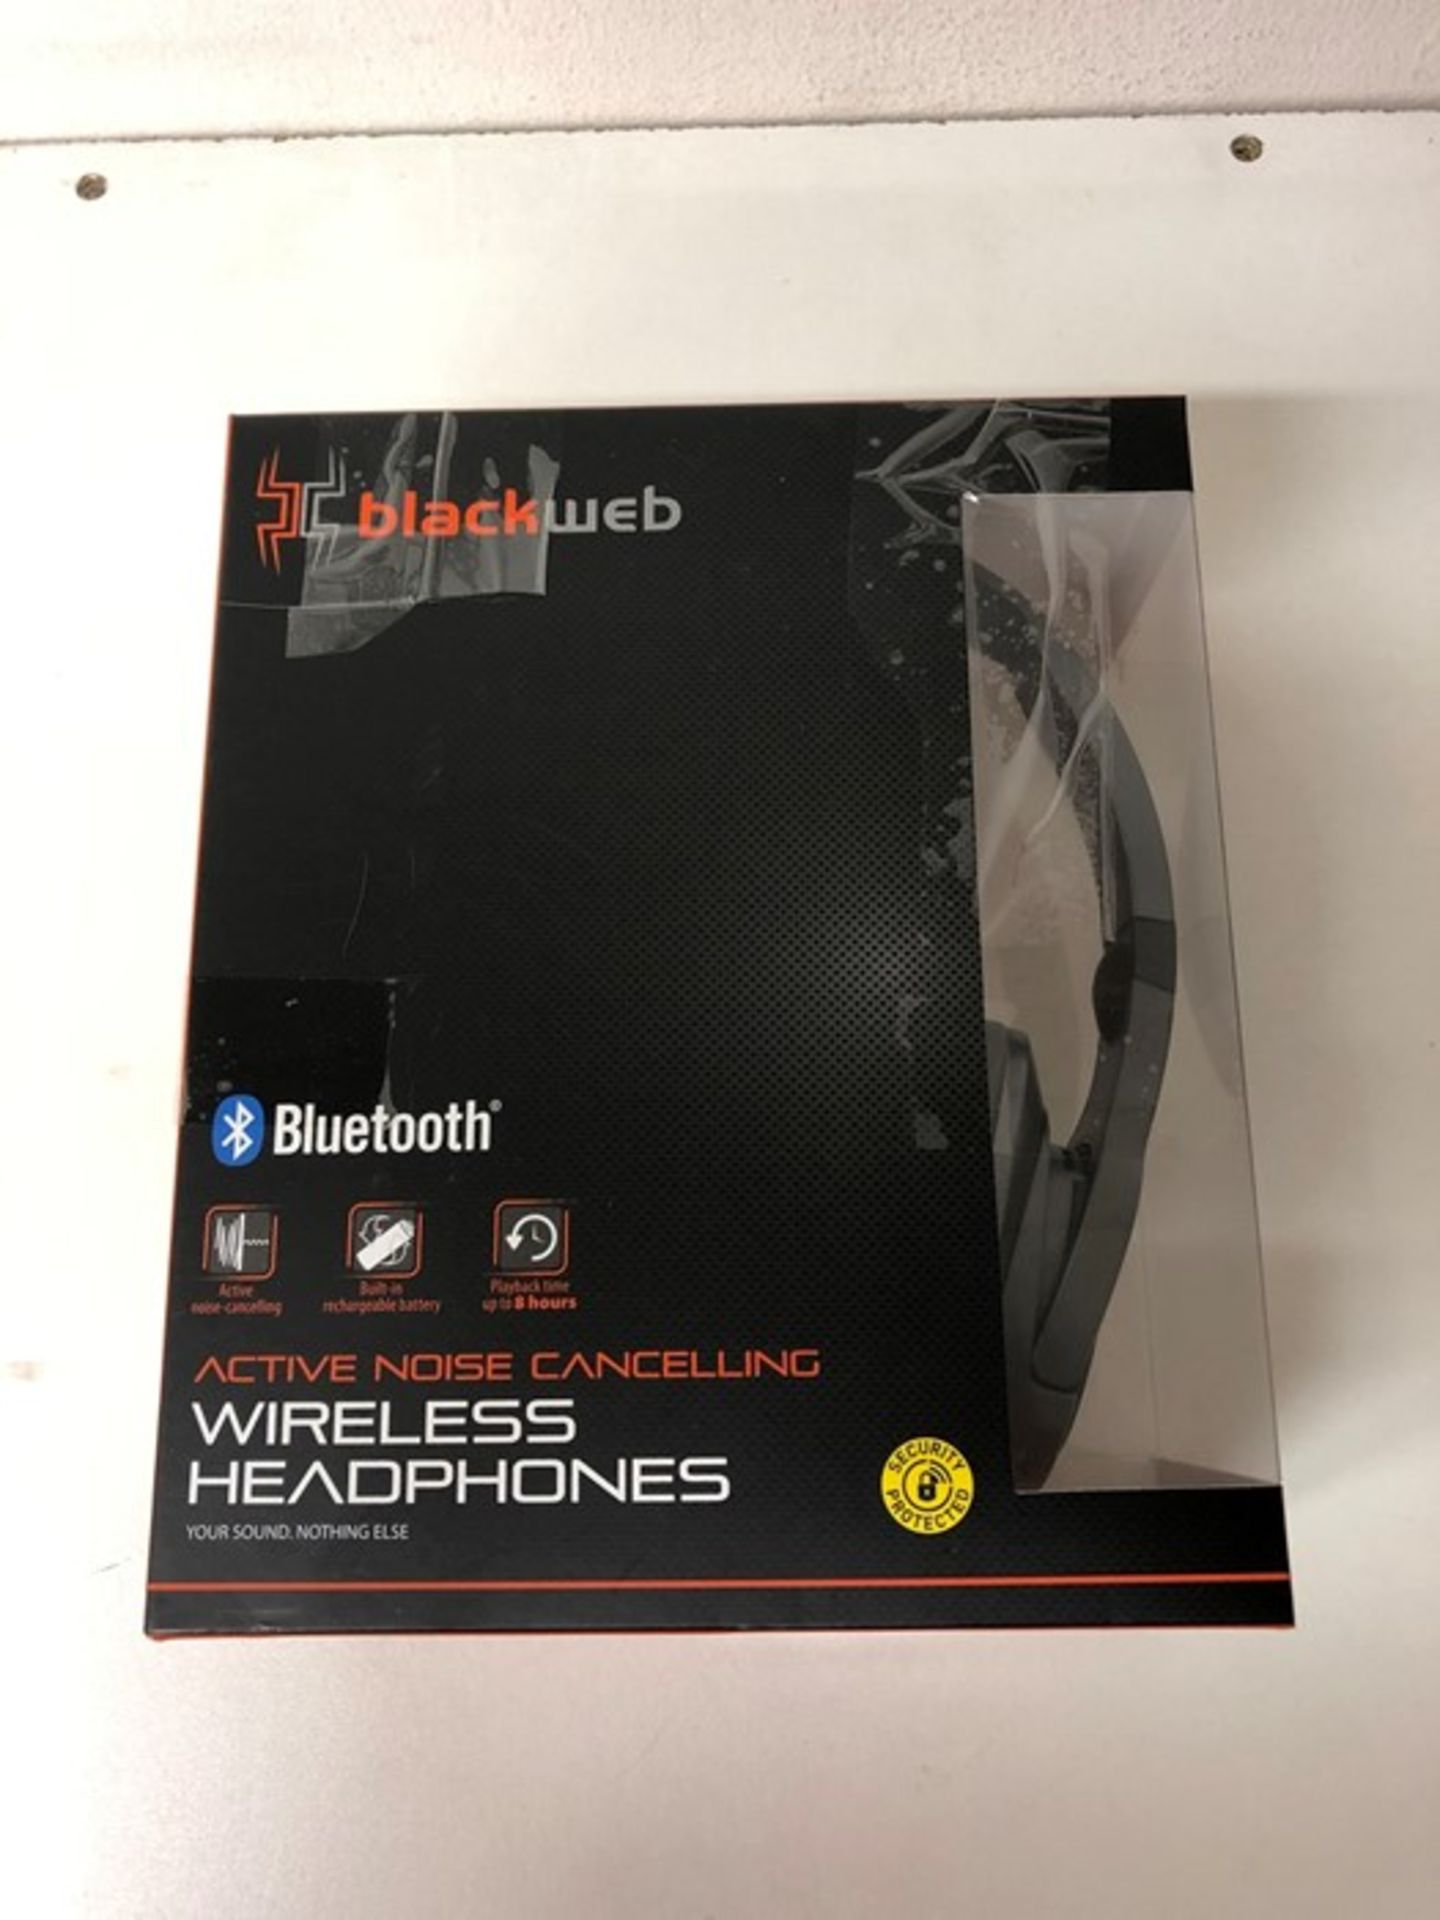 1 BOXED BLACK WEB BLUETOOTH WIRELESS HEADPHONES IN GREY AND BLACK / RRP £20.00 - BL 3809 (VIEWING